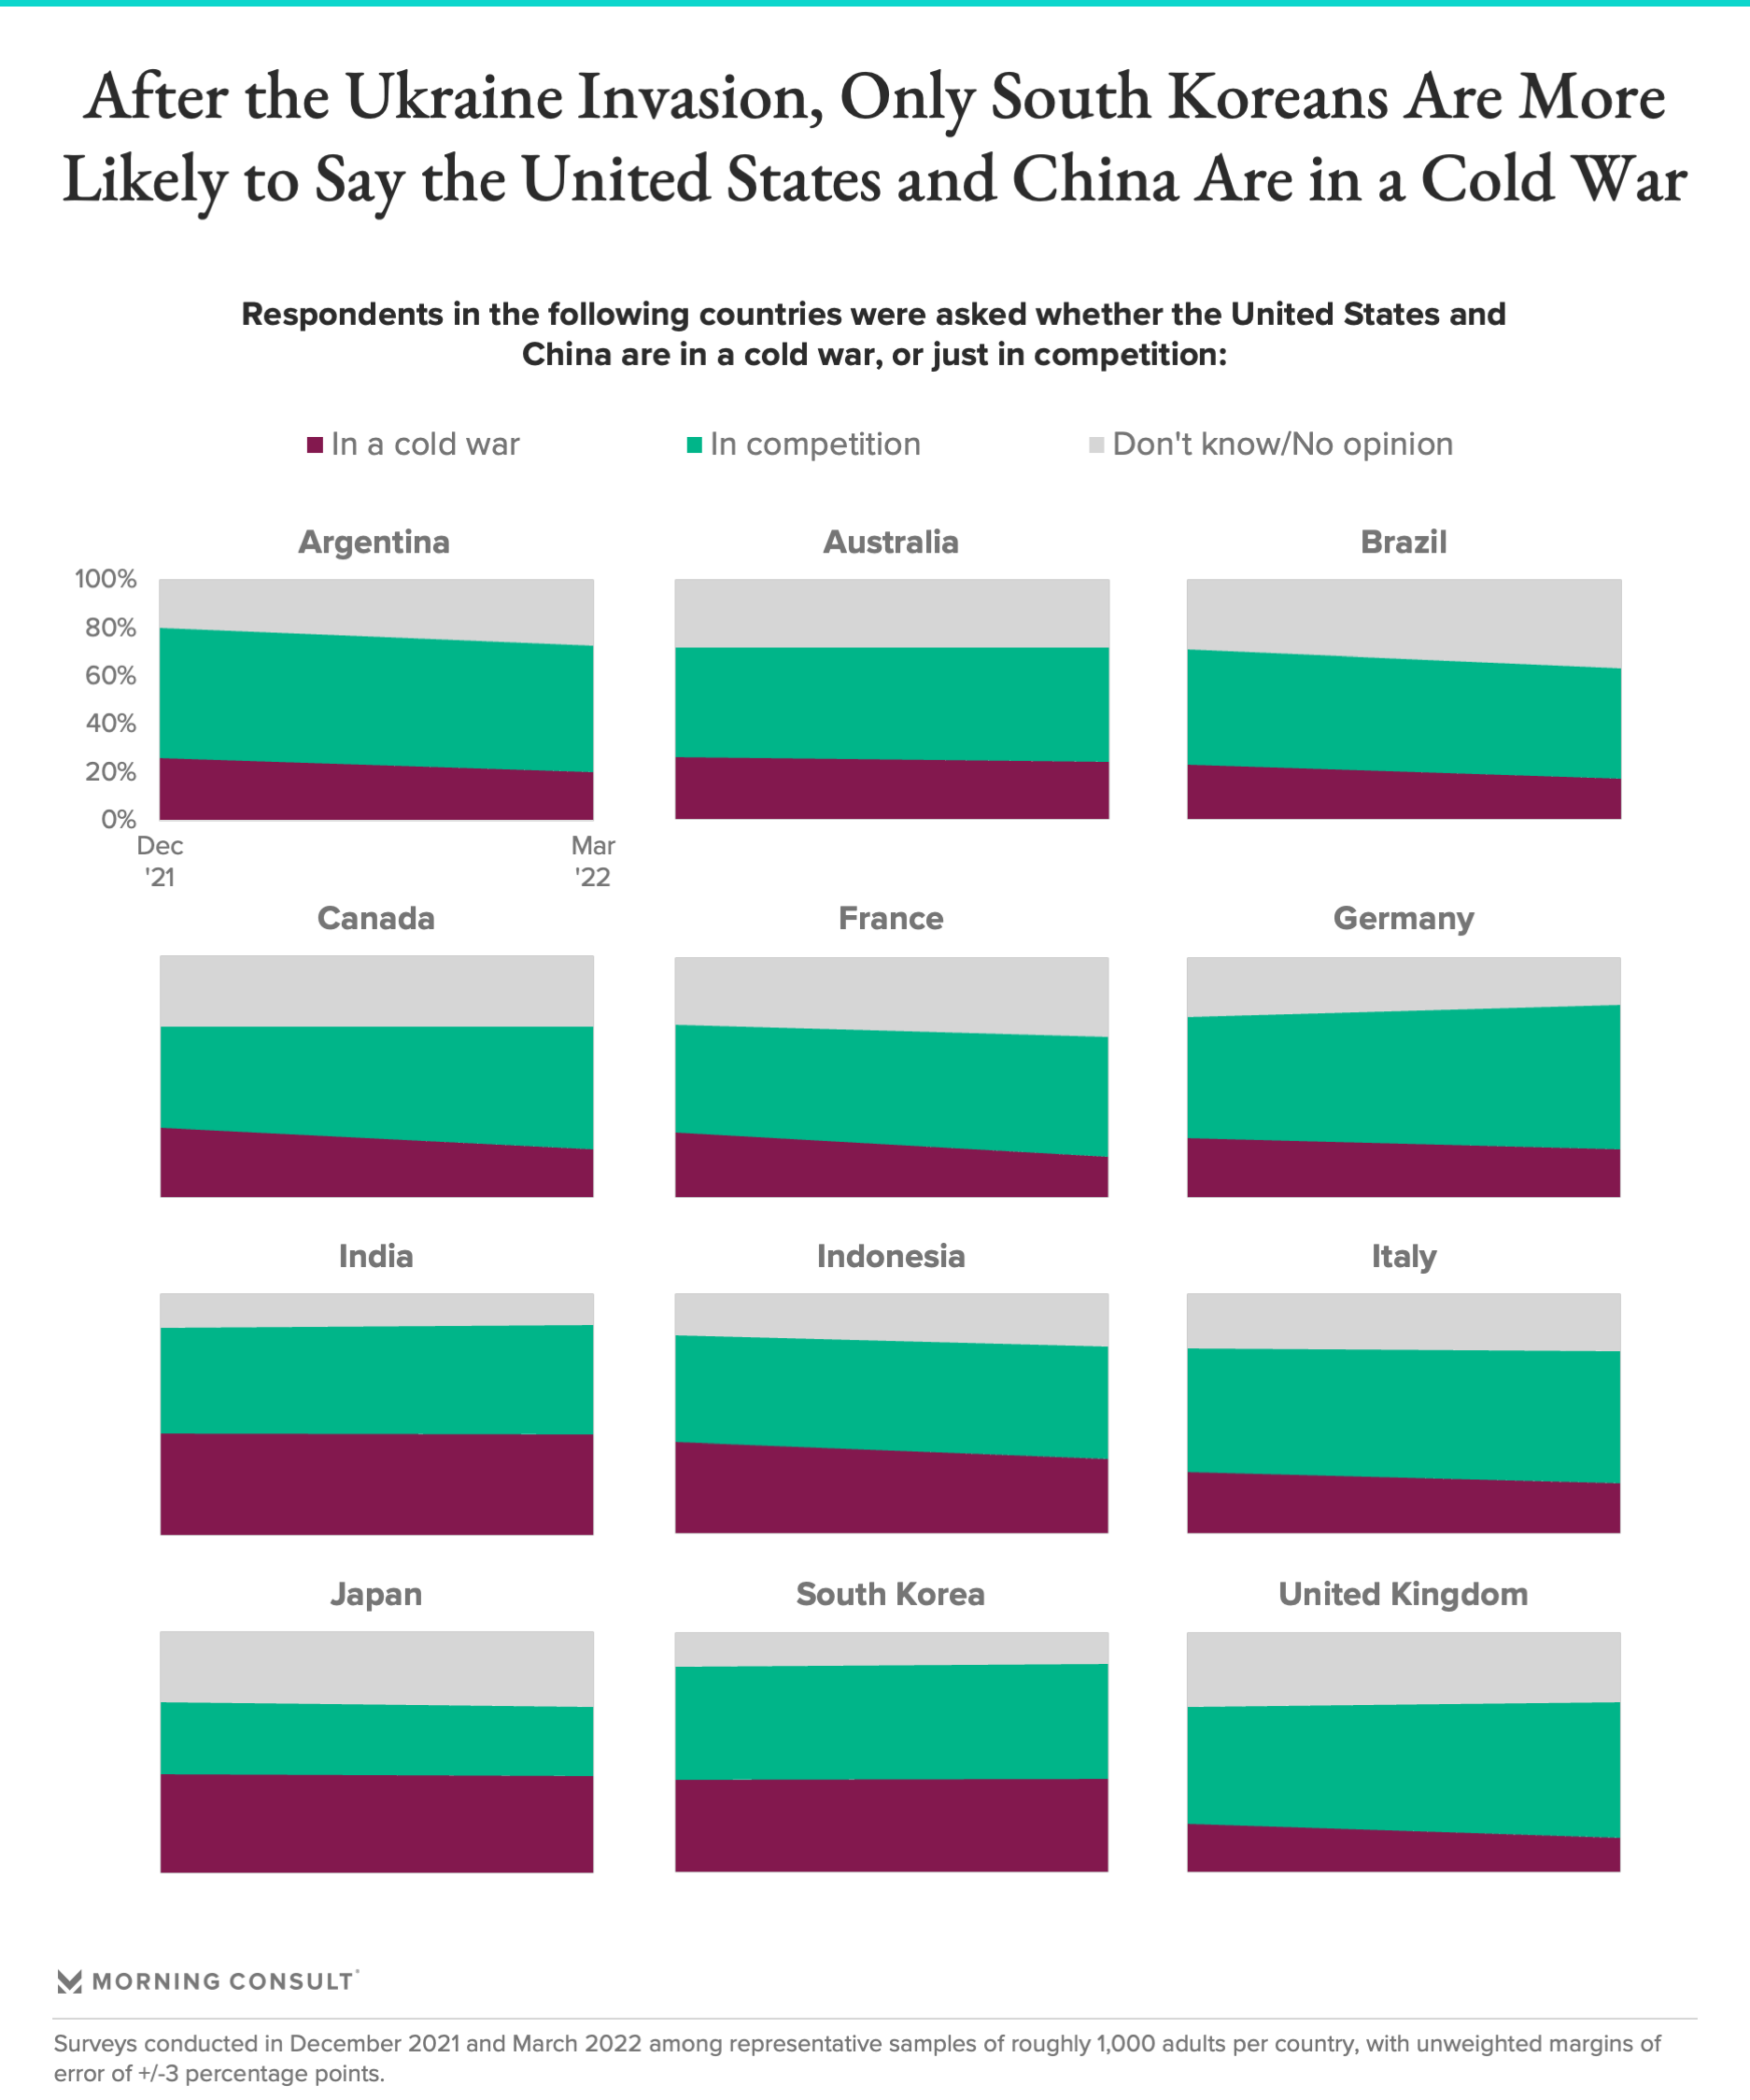 Bar charts showing responses as to whether the U.S. and China are currently in a cold war, by country